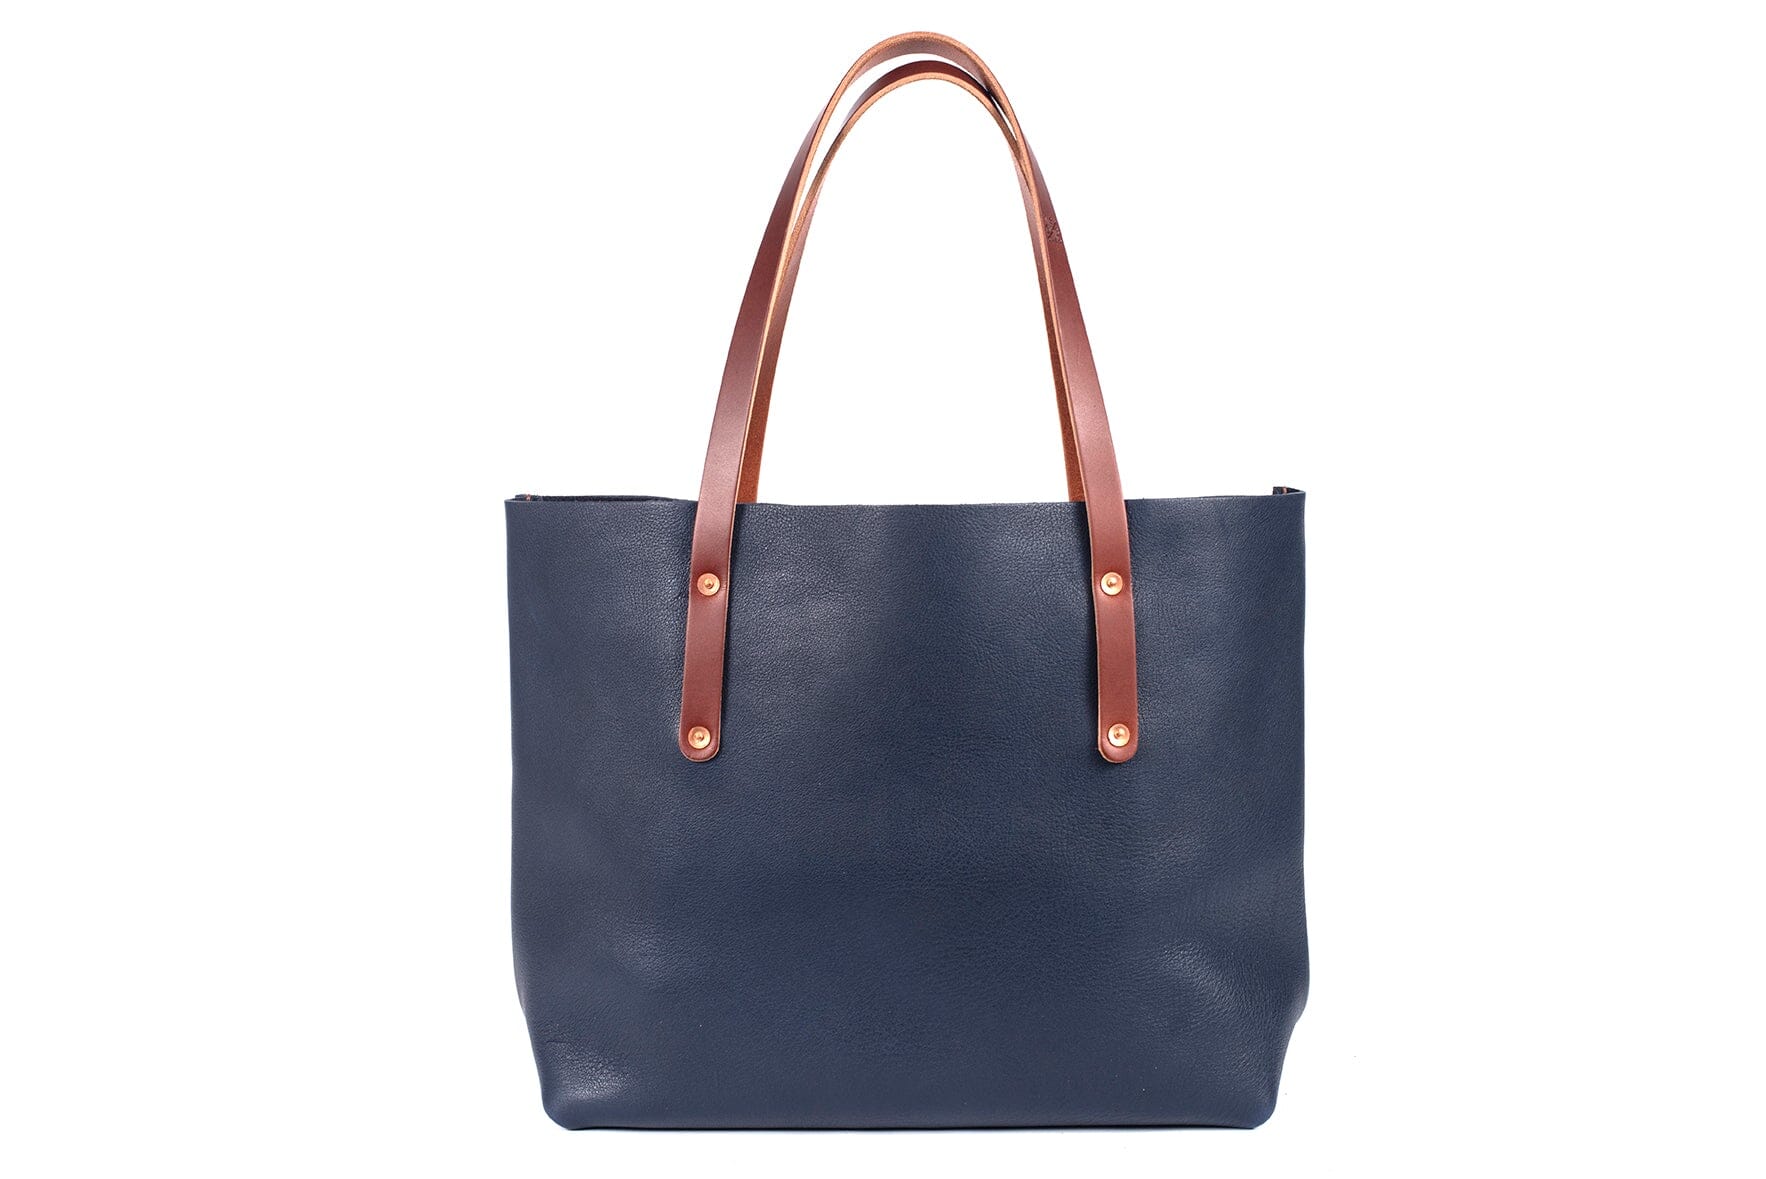 AVERY LEATHER TOTE BAG - LARGE - NAVY